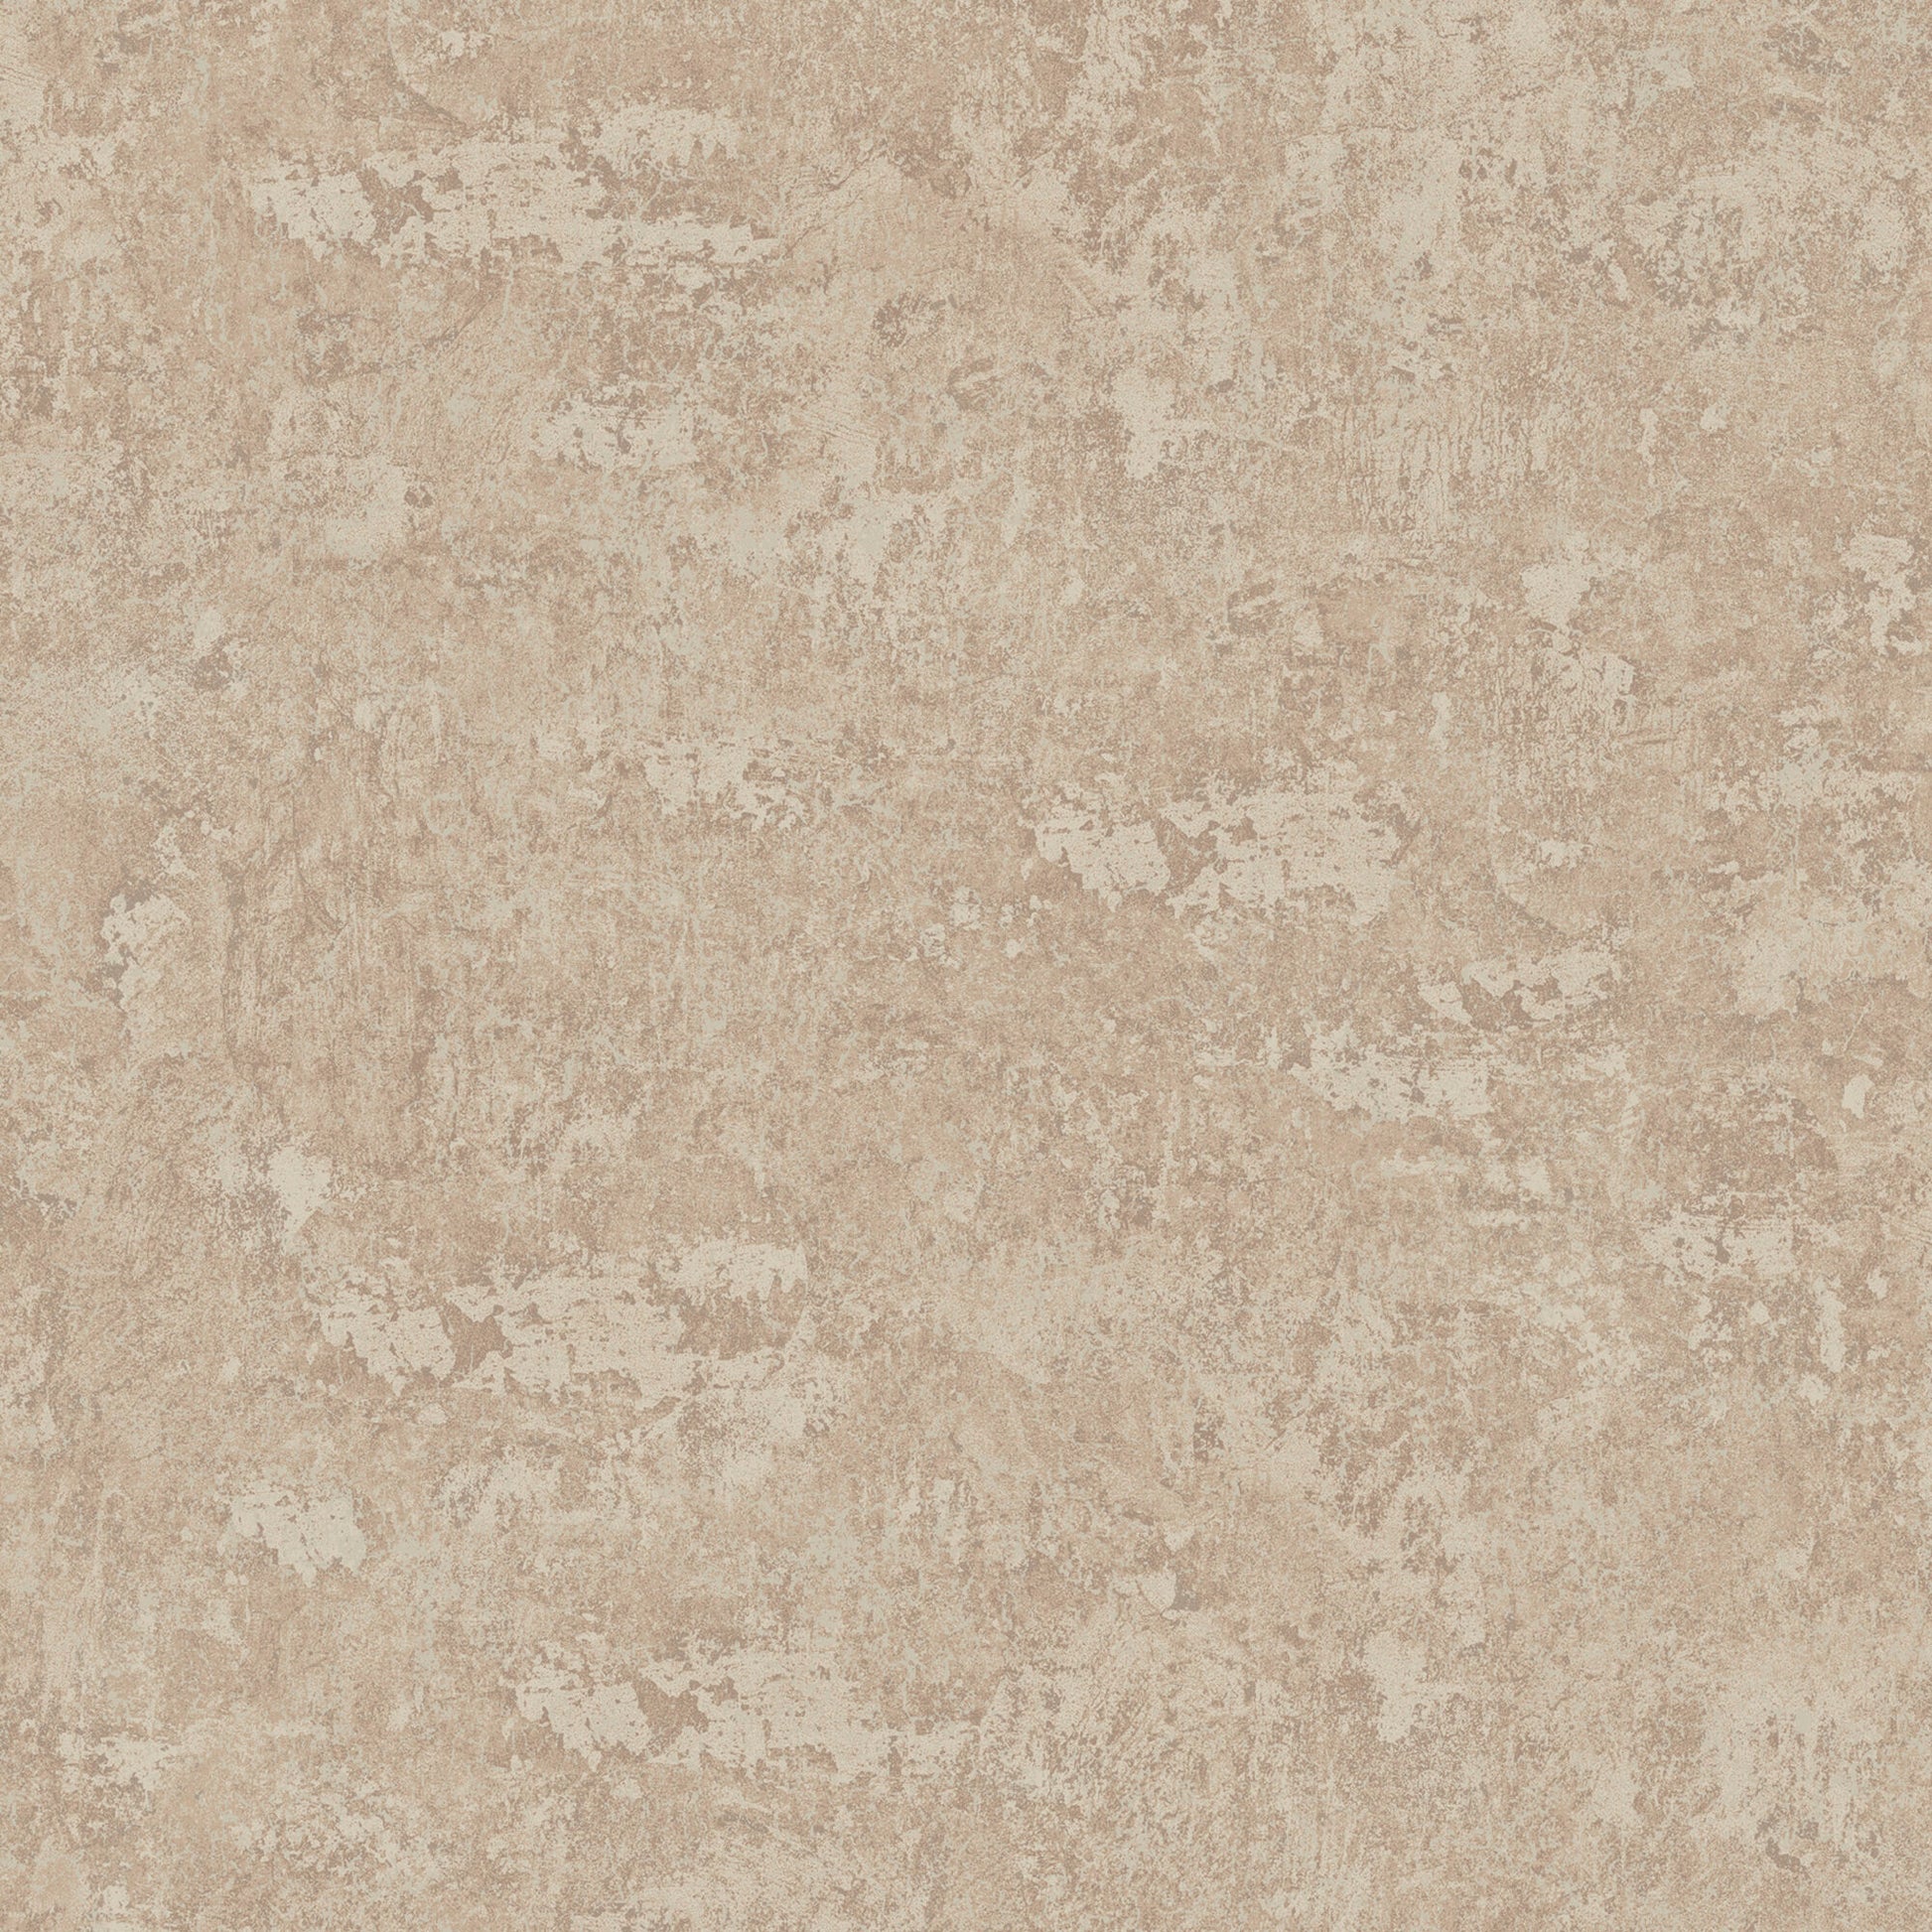 Purchase JF Wallpaper Pattern number 8201 23W9321 Brown Texture Wallpaper